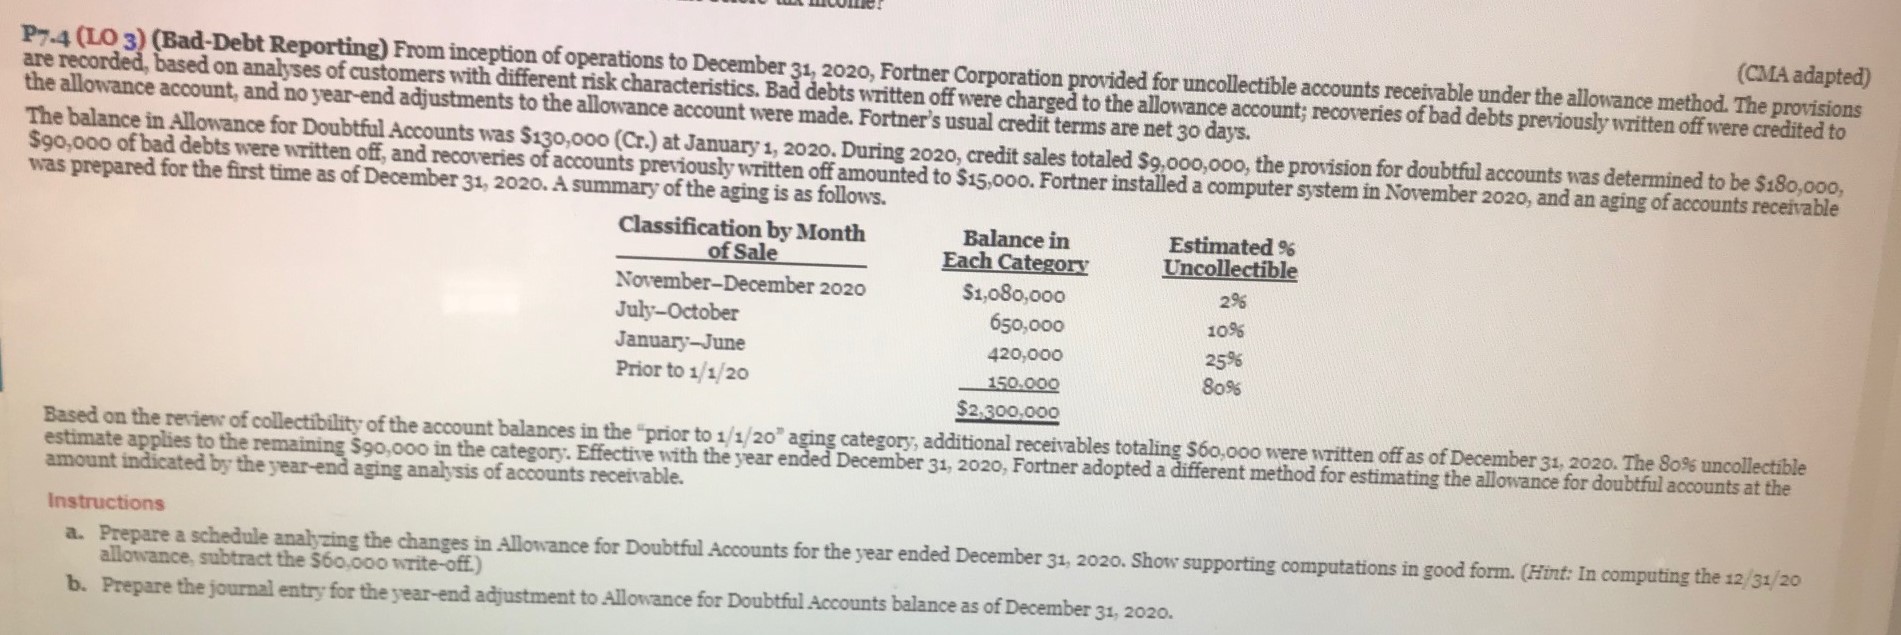 P7.4 (LO 3) (Bad-Debt Reporting) From inception of operations to December 31, 2020, Fortner Corporation provided for uncollectible accounts receivable under the allowance method. The provisions
are recorded, based on analyses of customers with different risk characteristics. Bad debts written off were charged to the allowance account; recoveries of bad debts previously written off were credited to
the allowance account, and no year-end adjustments to the allowance account were made. Fortner's usual credit terms are net 30 days.
(CMA adapted)
The balance in Allowance for Doubtful Accounts was $130,000 (Cr.) at January 1, 2020. During 2020, credit sales totaled $9,000,000, the provision for doubtful accounts was determined to be $180,000,
$90,000 of bad debts were written off, and recoveries of accounts previously written off amounted to $15,000. Fortner installed a computer system in November 2020, and an aging of accounts receivable
was prepared for the first time as of December 31, 2020. A summary of the aging is as follows.
Classification by Month
of Sale
Balance in
Each Category
Estimated %
Uncollectible
November-December 2020
$1,080,000
650,000
2%
July-October
10%
January-June
Prior to 1/1/20
25%
80%
420,000
150.000
$2,300,000
Based on the review of collectibility of the account balances in the "prior to 1/1/20" aging category, additional receivables totaling $60,000 were written off as of December 31, 2020. The So% uncollectible
estimate applies to the remaining $90,000 in the category. Effective with the year ended December 31, 2020, Fortner adopted a different method for estimating the allowance for doubtful accounts at the
amount indicated by the year-end aging analysis of accounts receivable.
Instructions
a. Prepare a schedule analyzing the changes in Allowance for Doubtful Accounts for the year ended December 31, 2020. Show supporting computations in good form. (Hint: In computing the 12/31/20
allowance, subtract the $60,00O write-off.)
b. Prepare the journal entry for the year-end adjustment to Allowance for Doubtful Accounts balance as of December 31, 2020.
